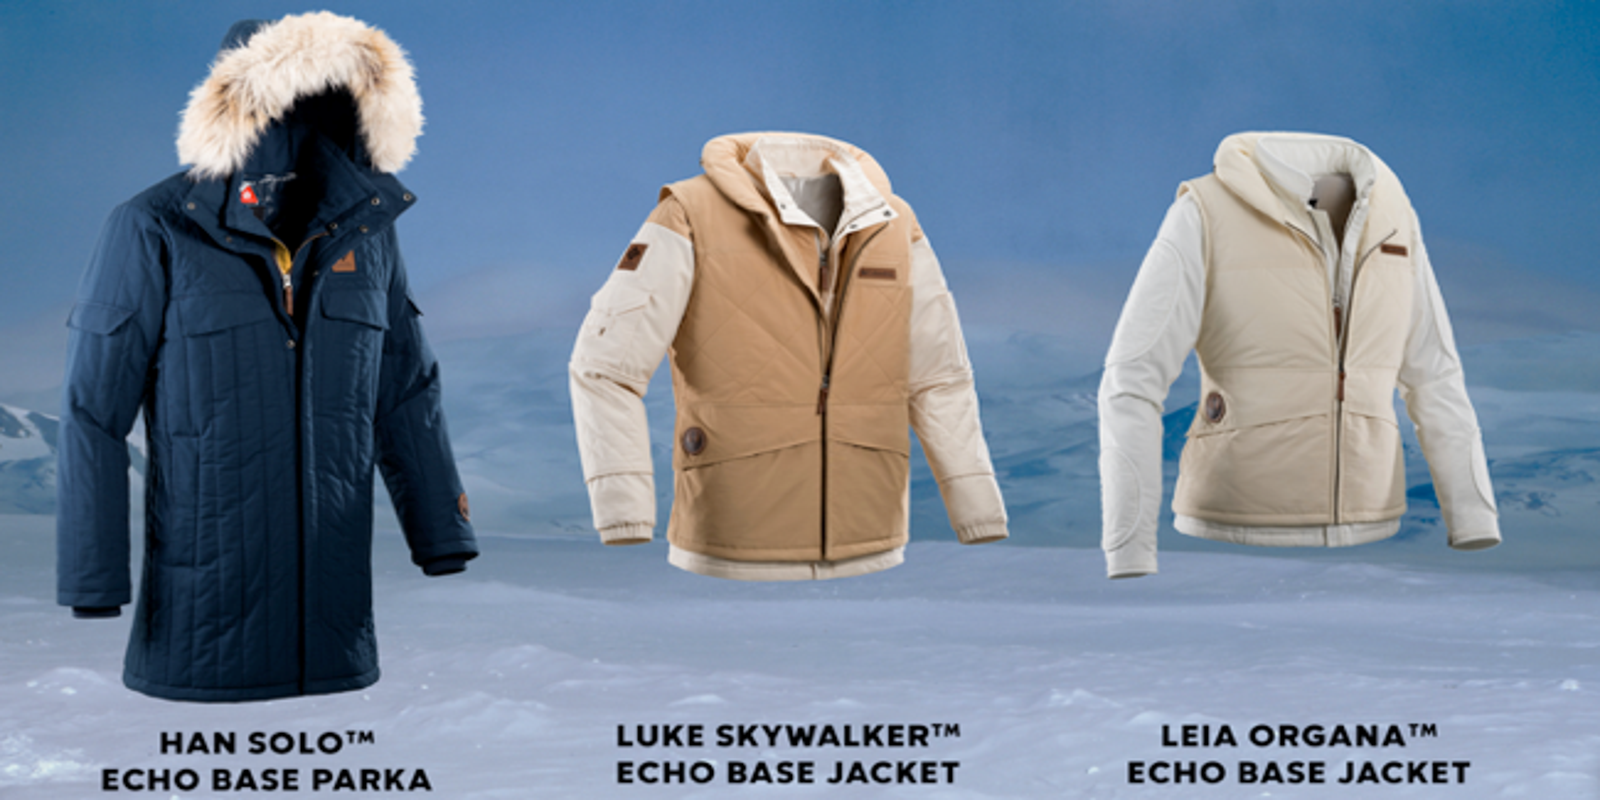 How to score a limited edition Star Wars jacket by Columbia